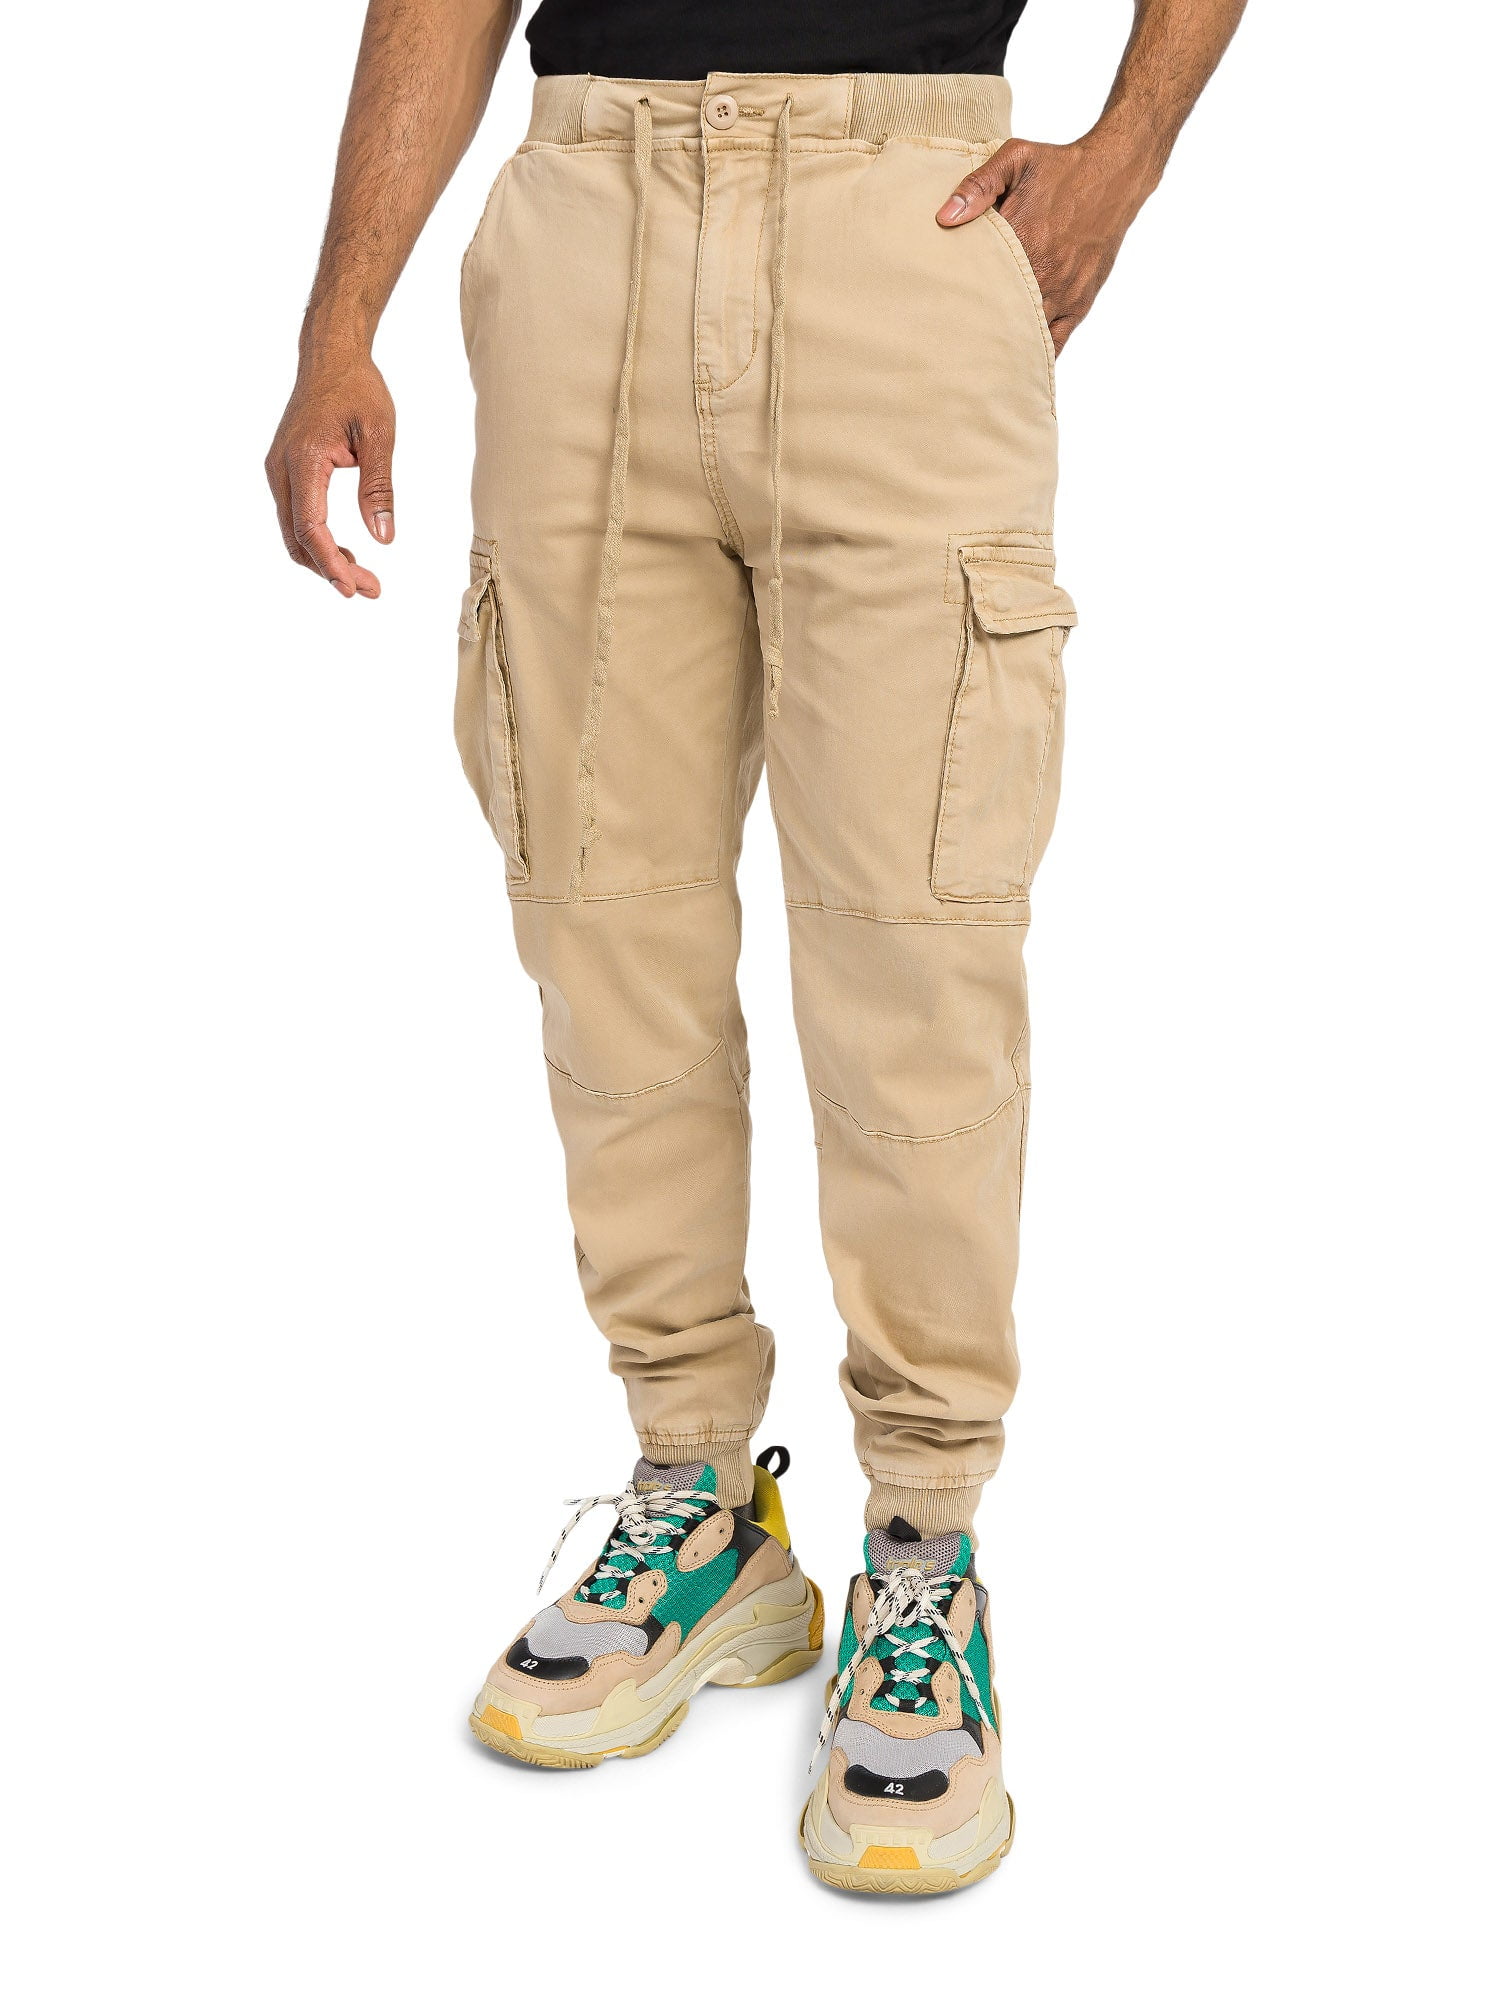 Victorious Men's Jogger Twill Cargo Pants, Up To 5X 